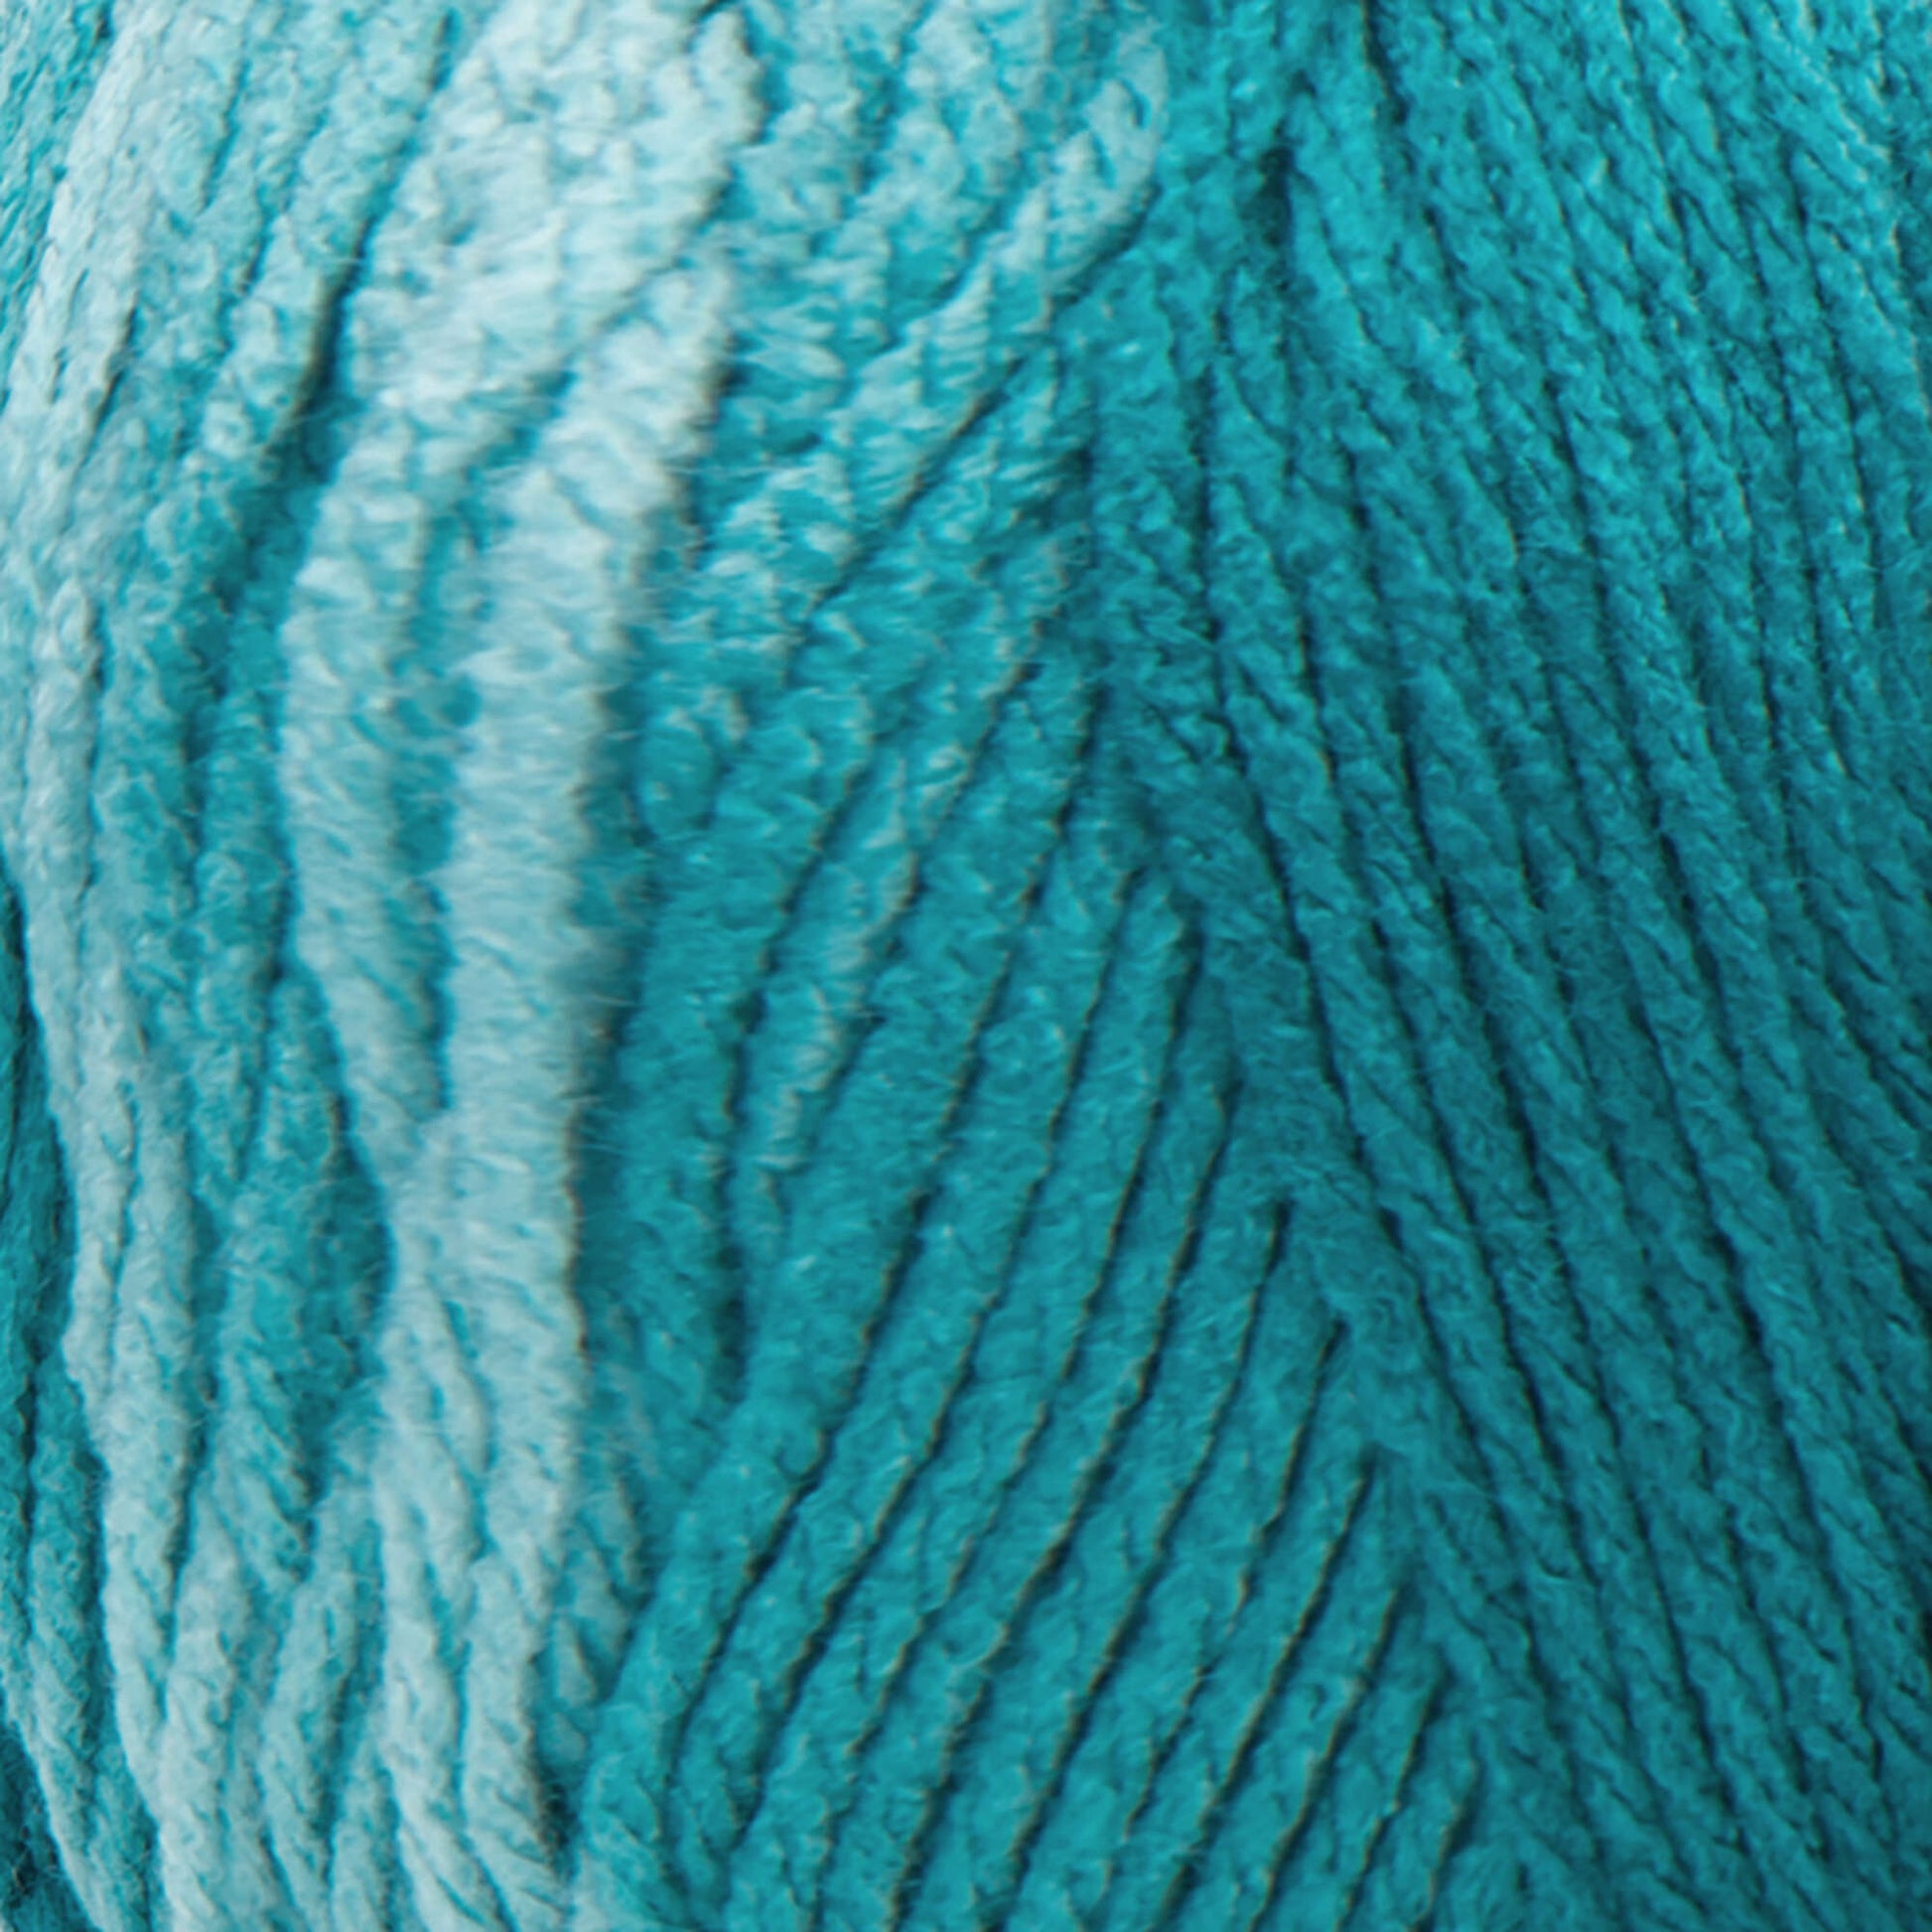 Red Heart Super Saver Ombre Yarn Deep Teal